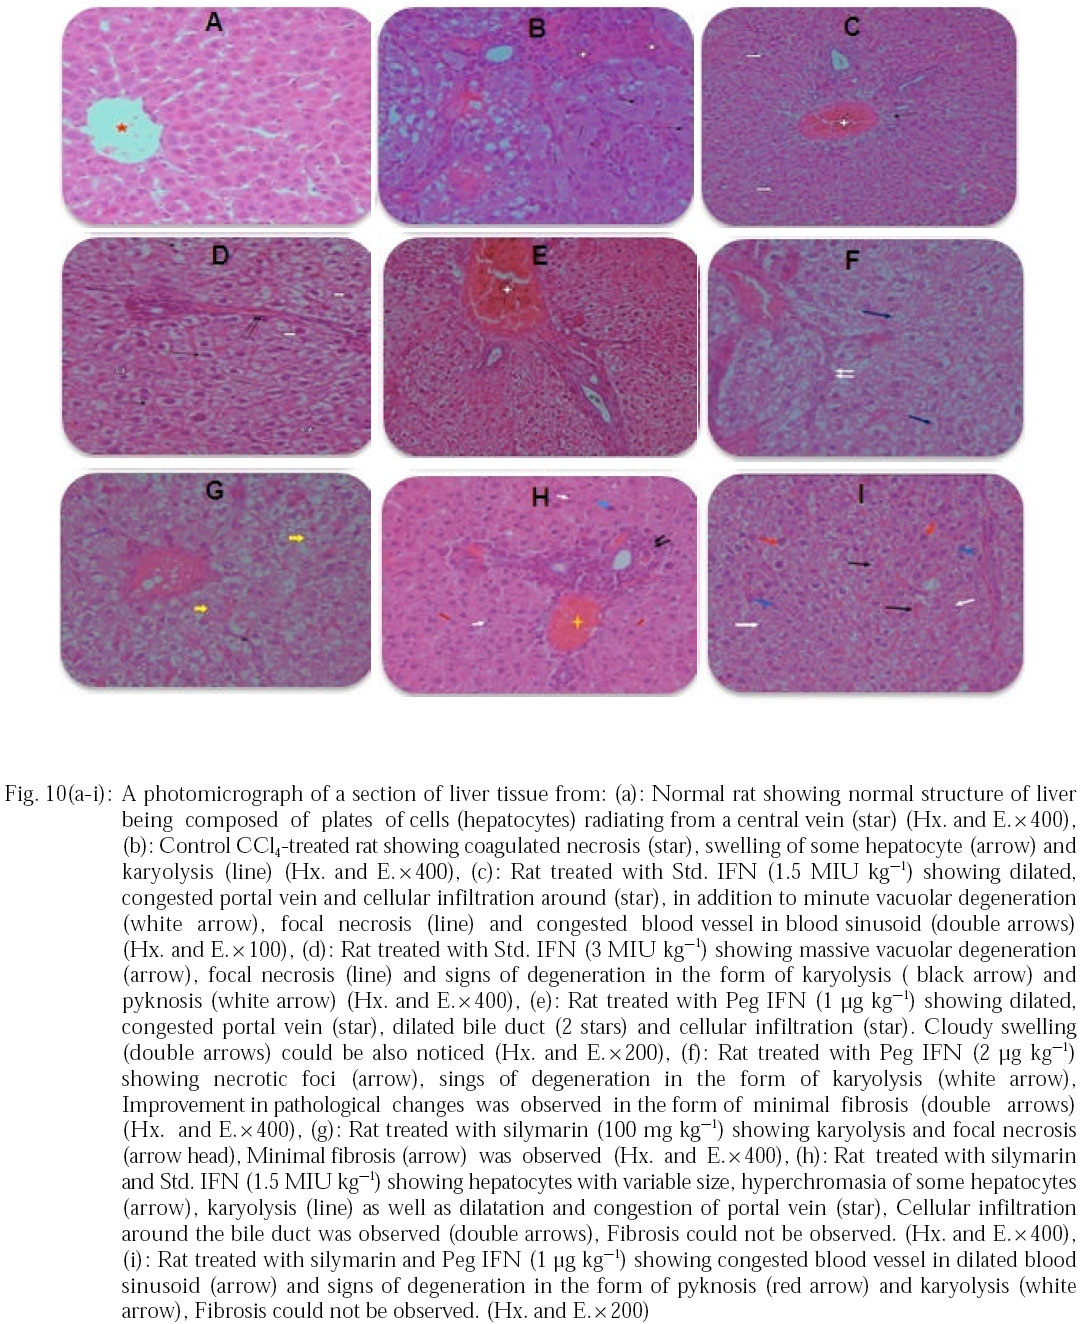 Image for - Pegylated Interferon Versus Standard Interferon and Silymarin in Treatment of Liver Fibrosis Induced by Chronic Carbon Tetrachloride in Rats